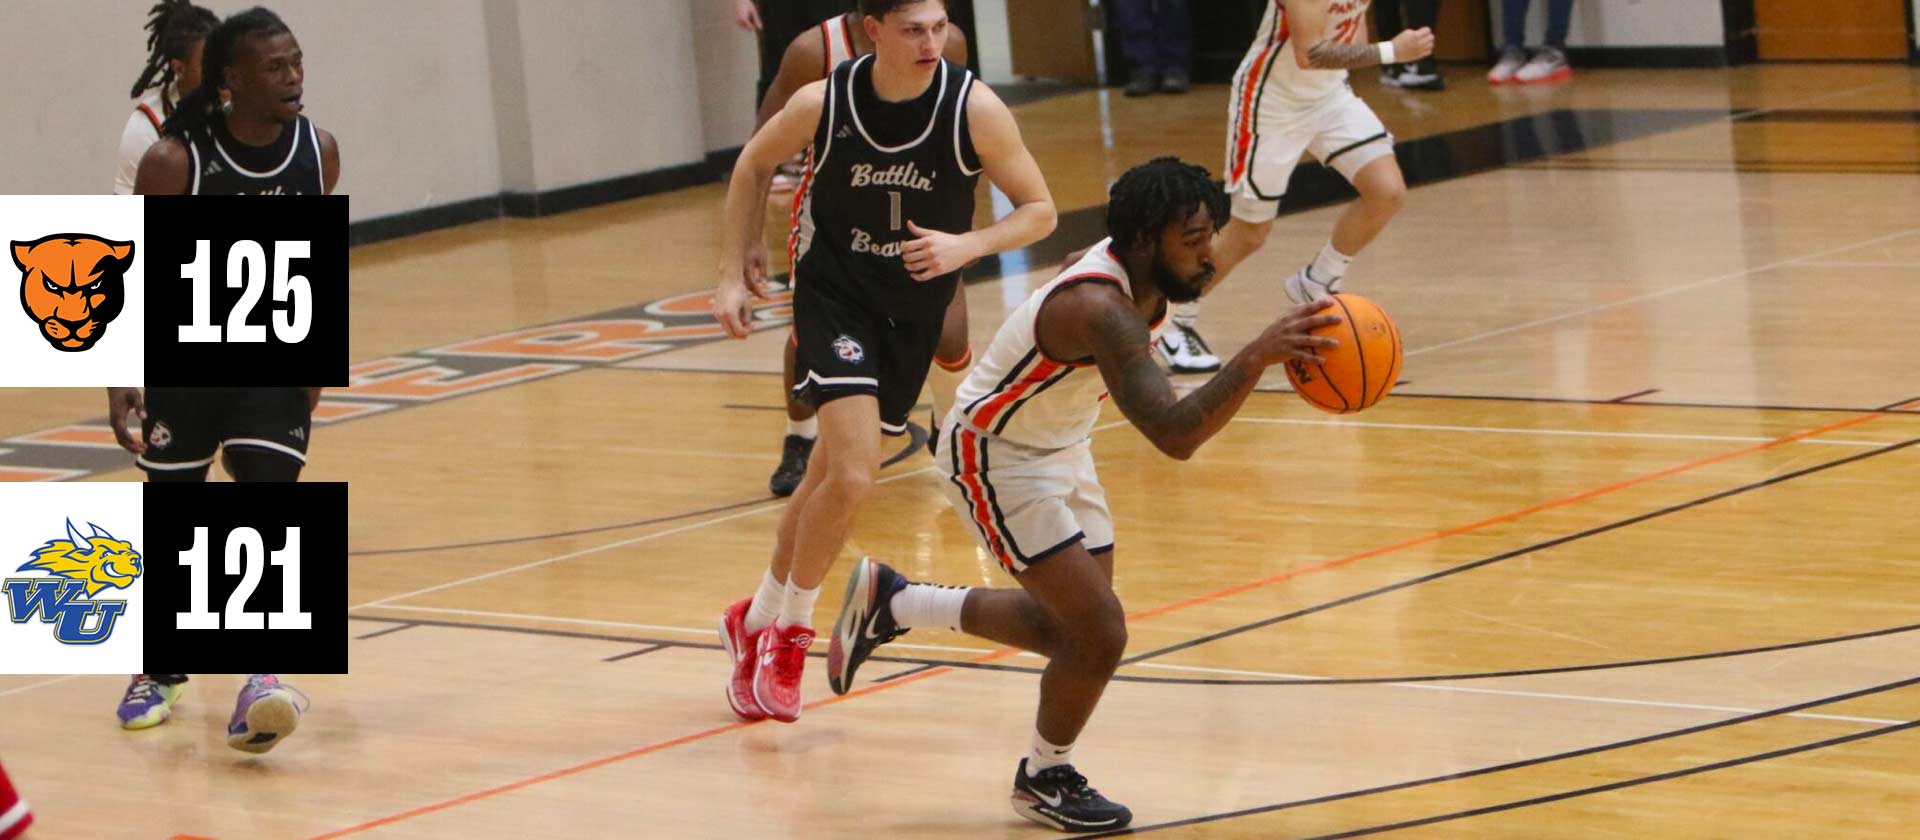 Men's basketball records 125-121 victory at Webster